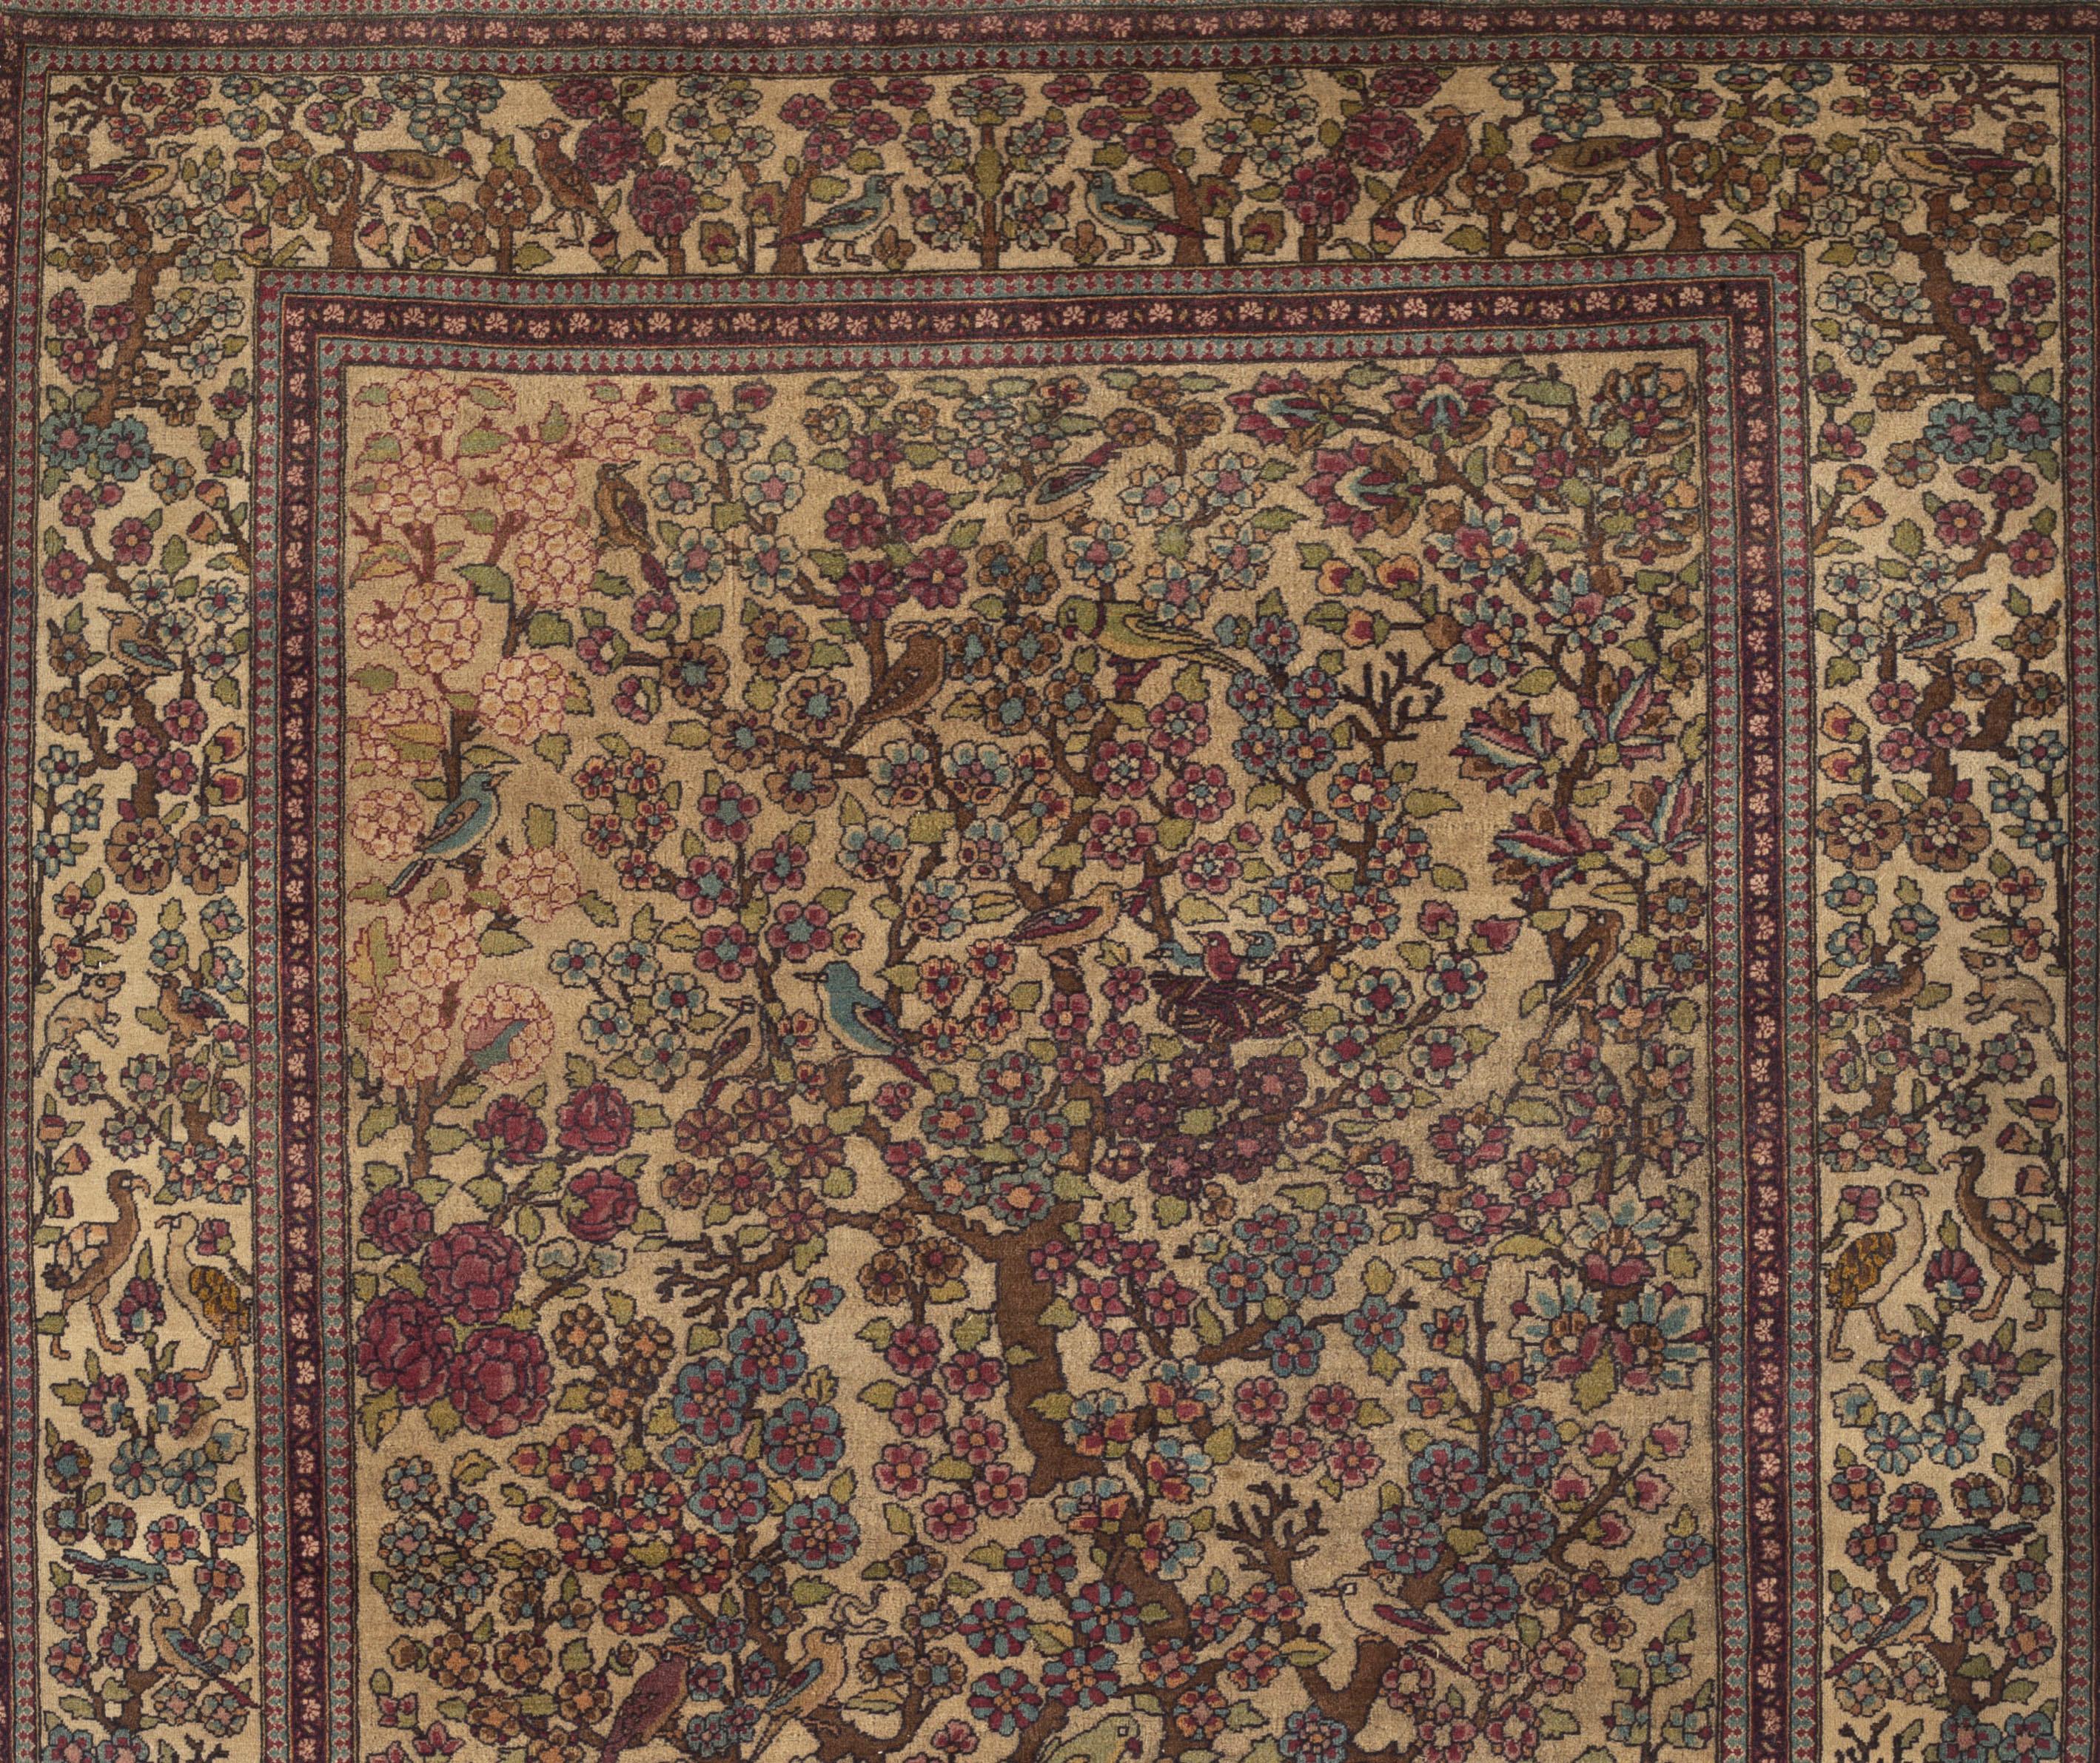 Antique Tehran rug circa 1880. Rug production in Tehran the capital of Persia was only for a short period from around 1860s to the 1950s and are considered to be of a high quality. This lovely example with a flowering tree in the center surrounded